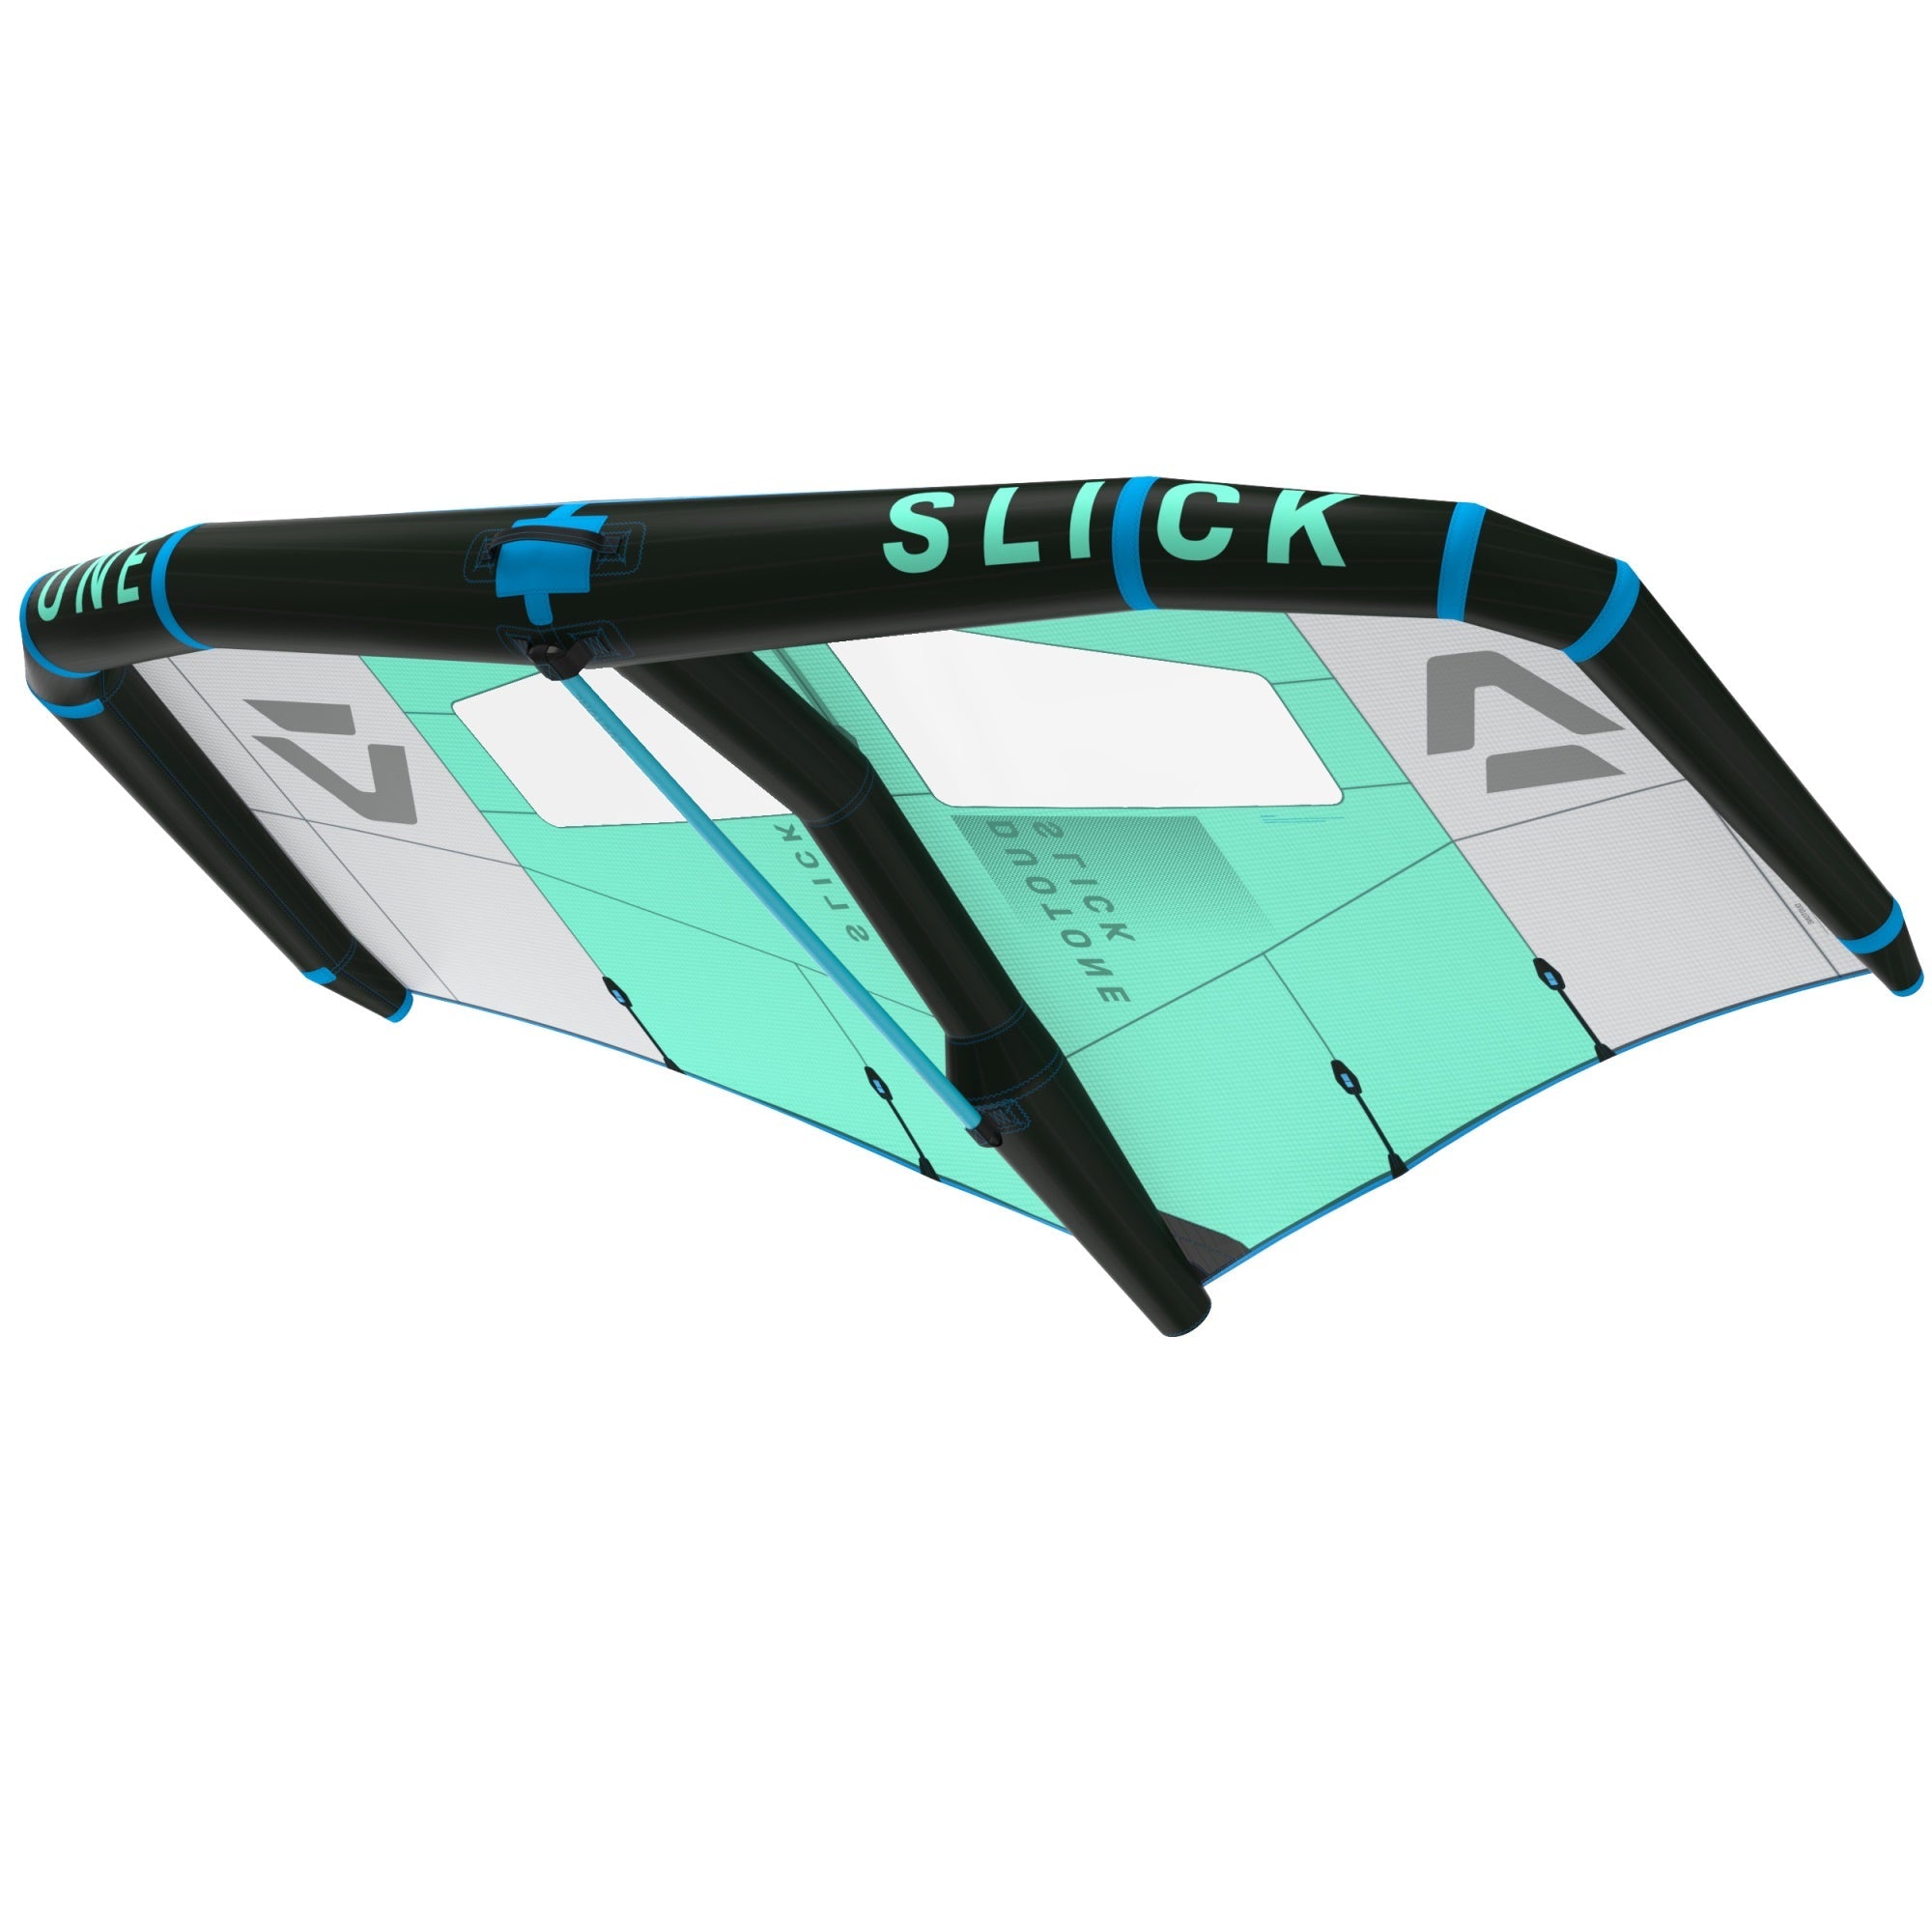 Duotone Foil Wing Slick 4m - Worthing Watersports - Foilwing - Duotone X